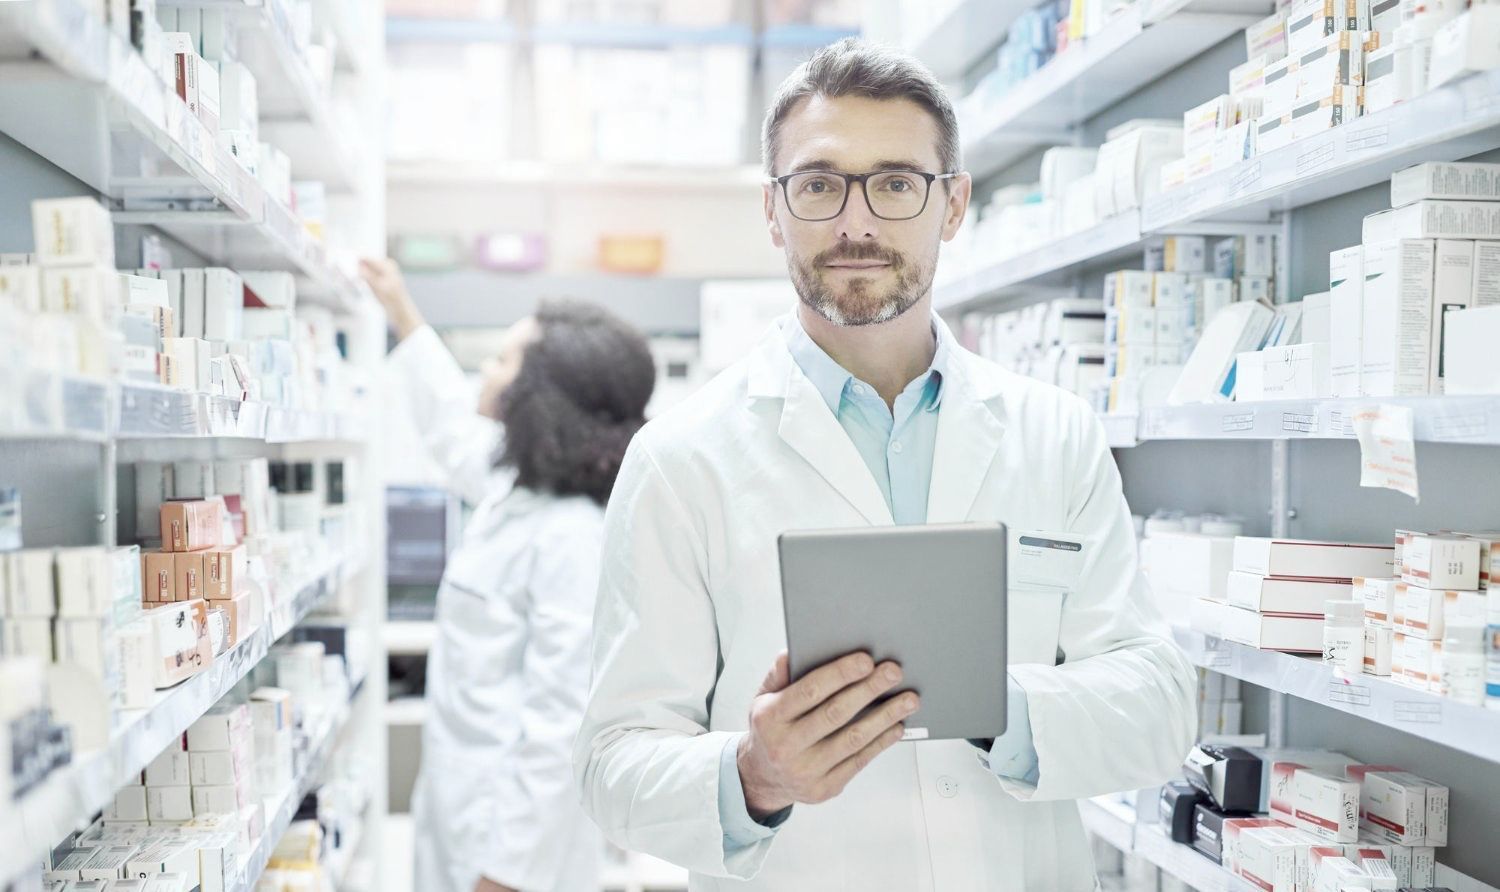 A pharmacist is holding a tablet in a mail-order pharmacy fulfillment center.